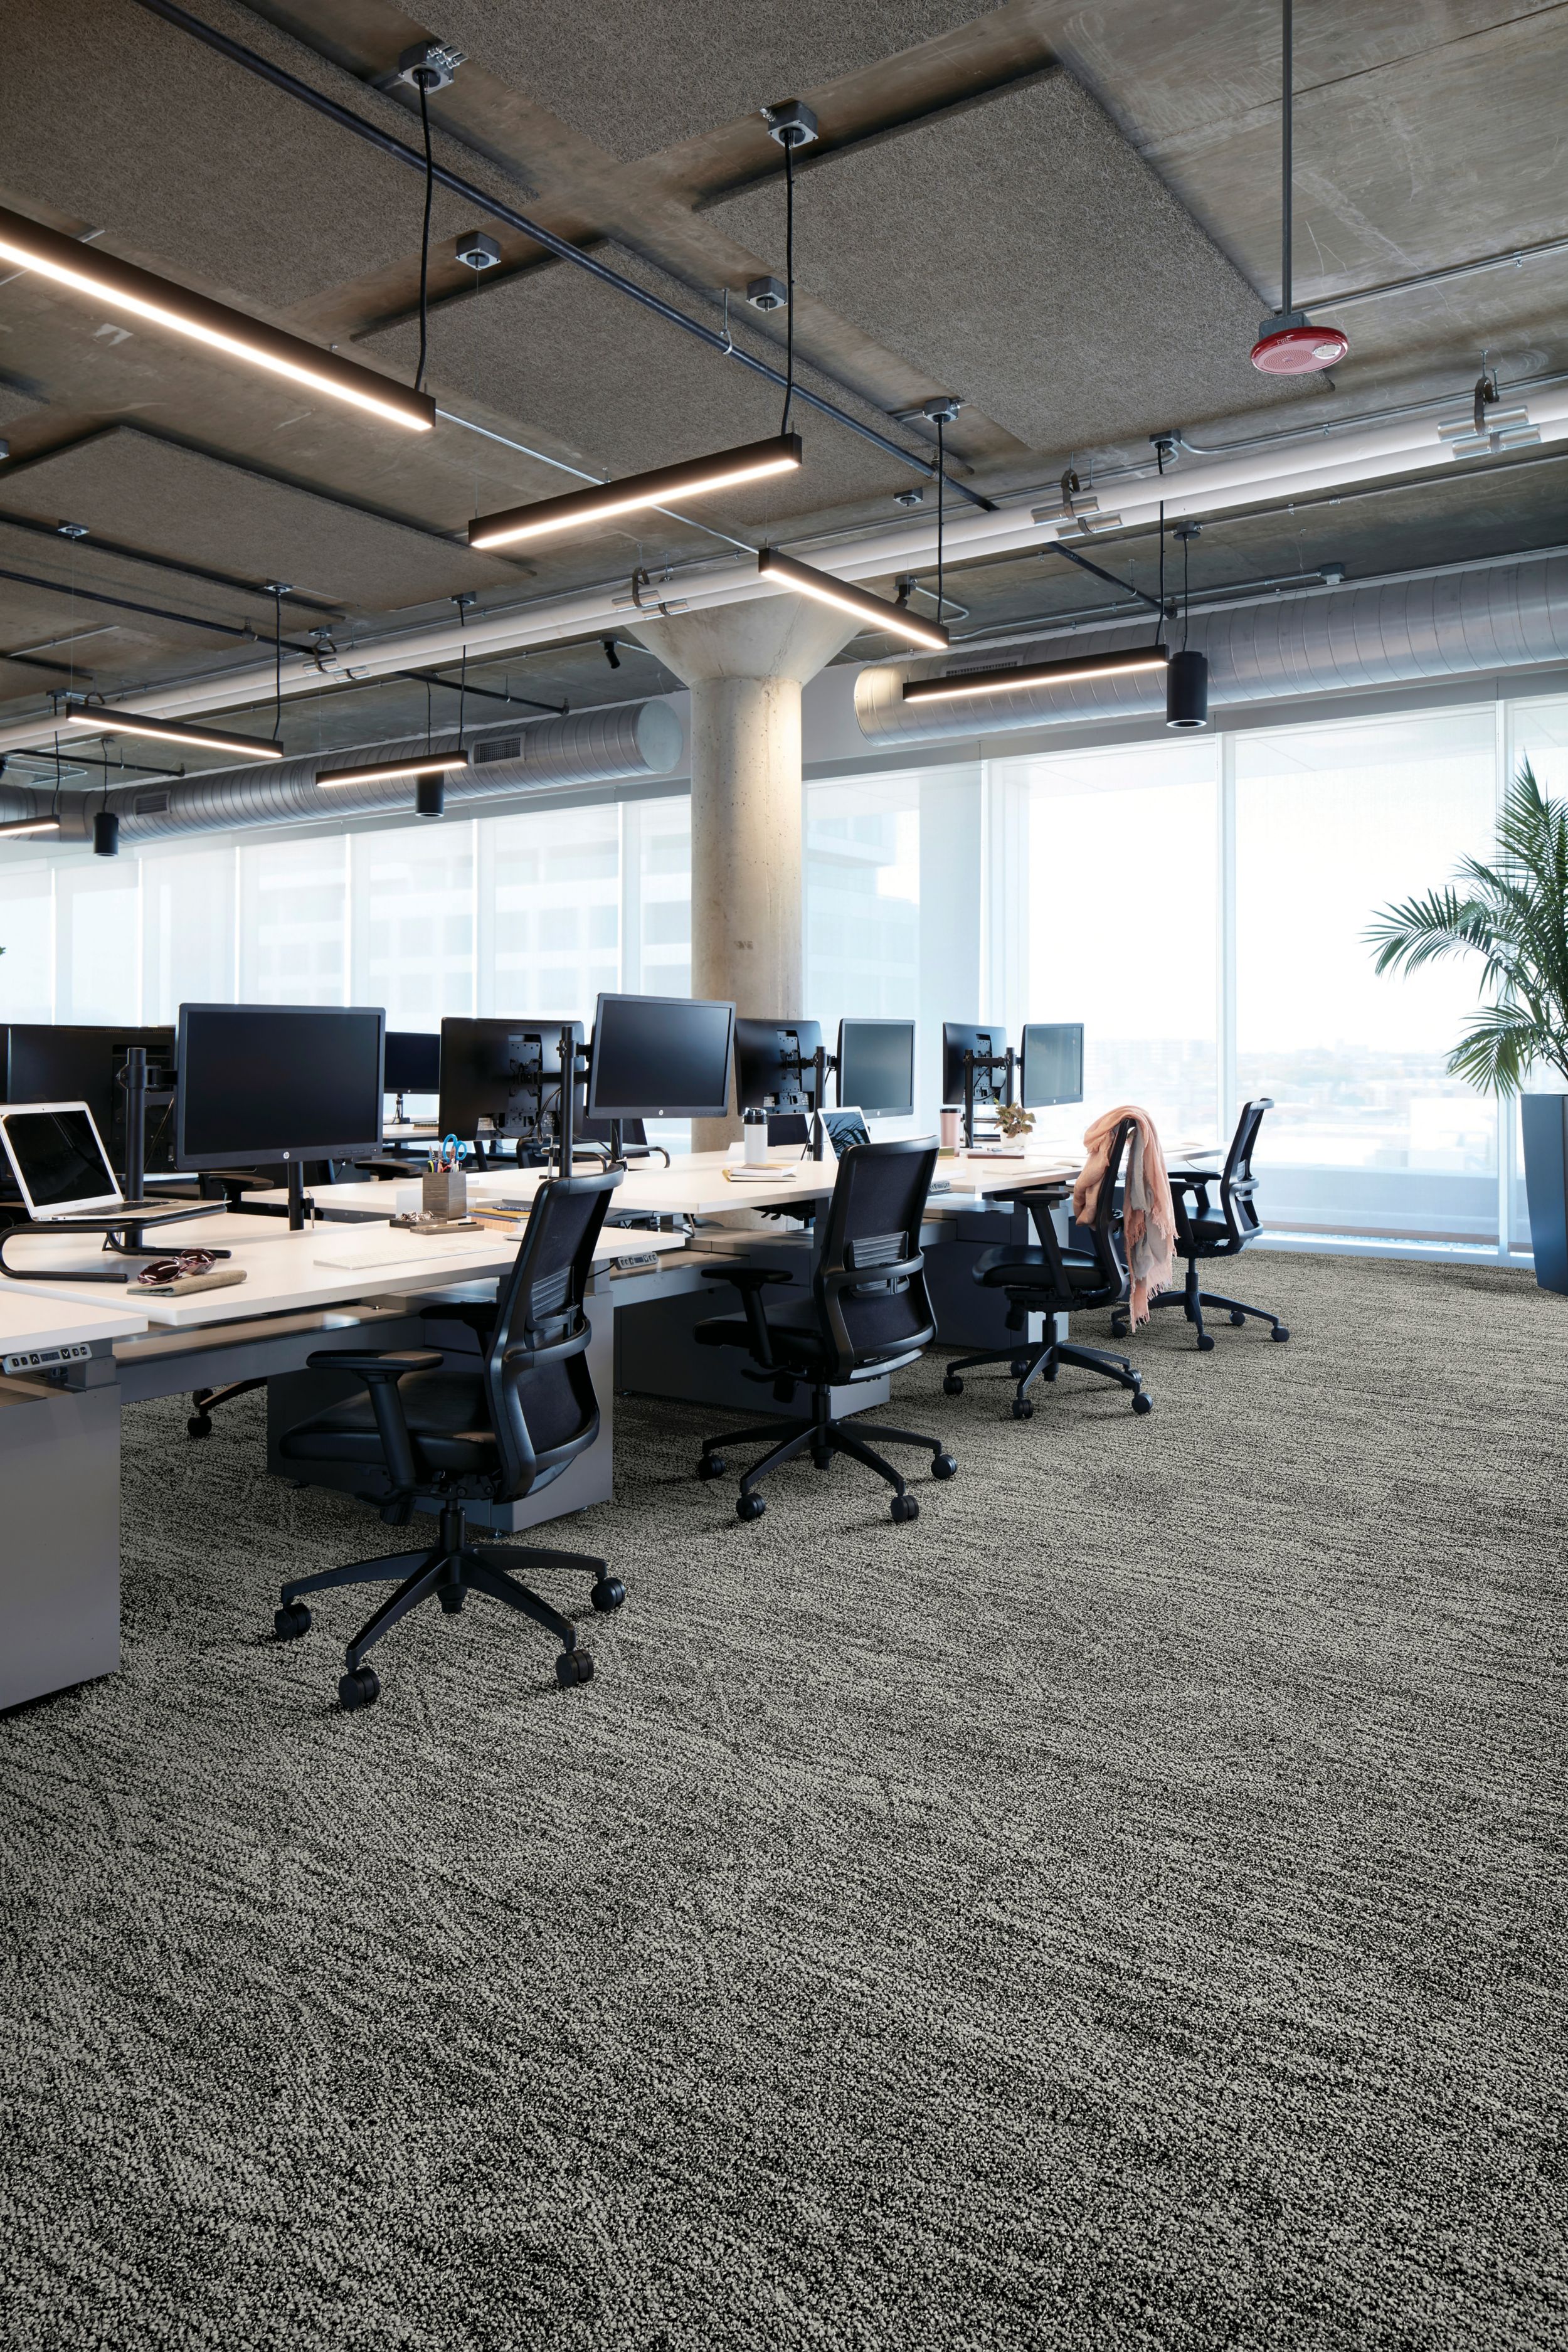 Interface Open Air 409 plank carpet tile with open work stations and cardigan draped over office chair imagen número 1